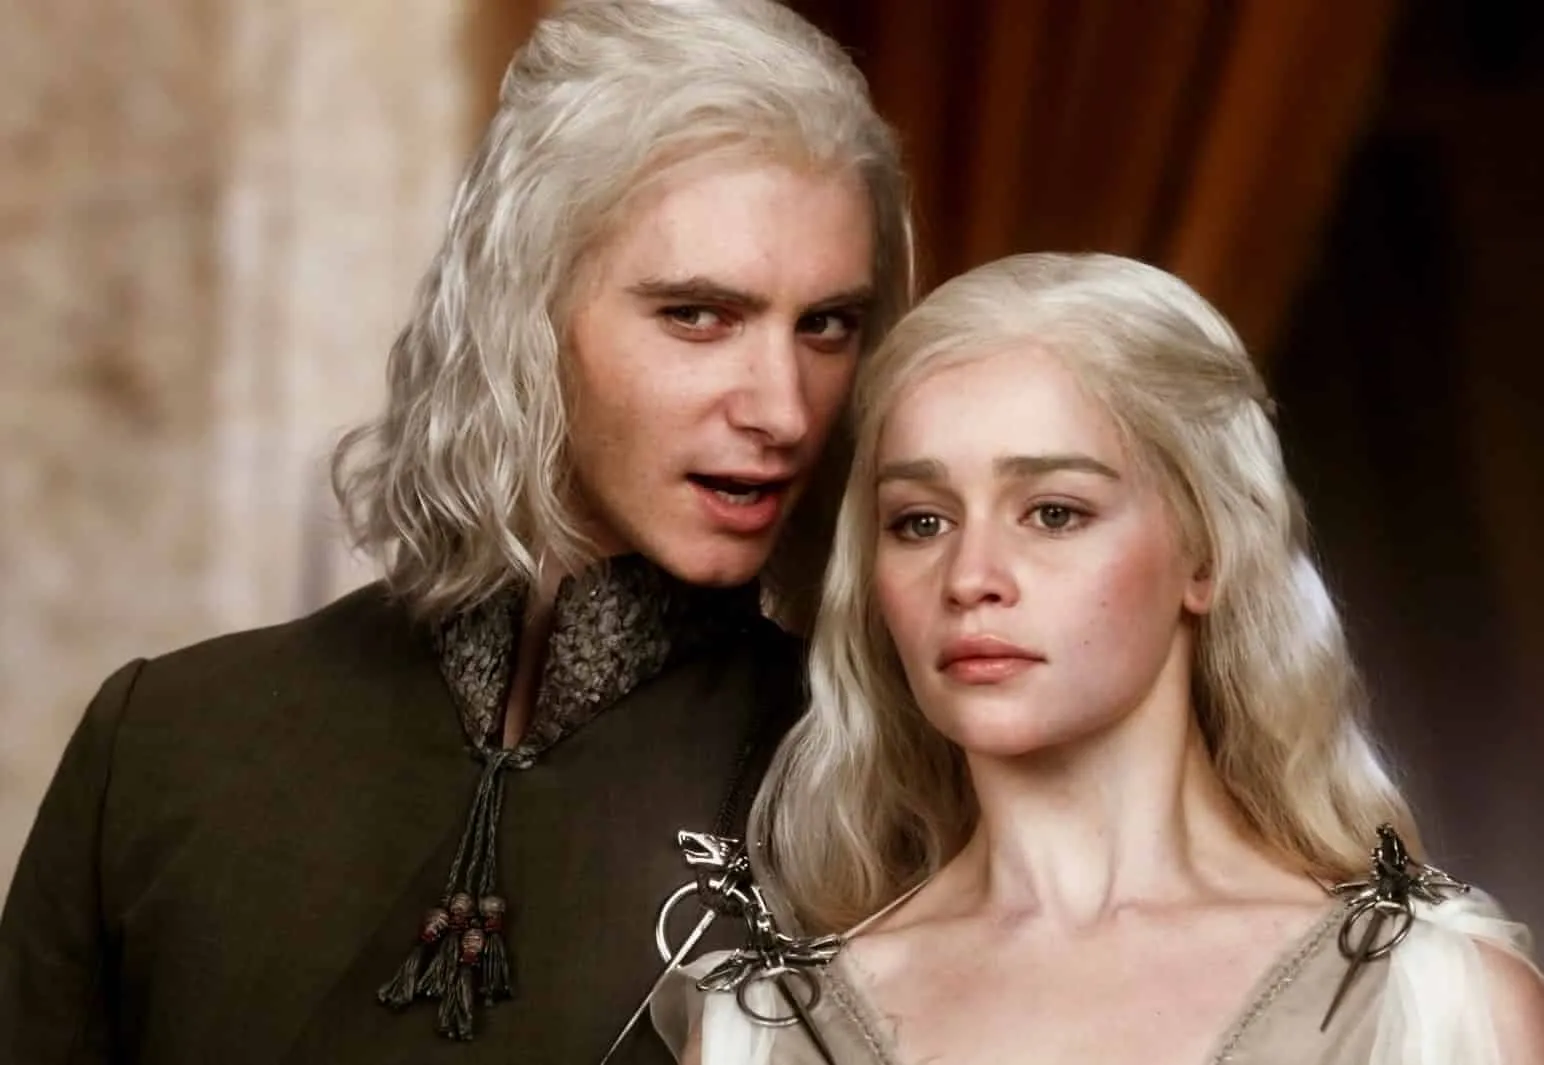 Emilia Clarke rose to prominence through her role as Daenerys Targaryen in ‘Game of Thrones’.